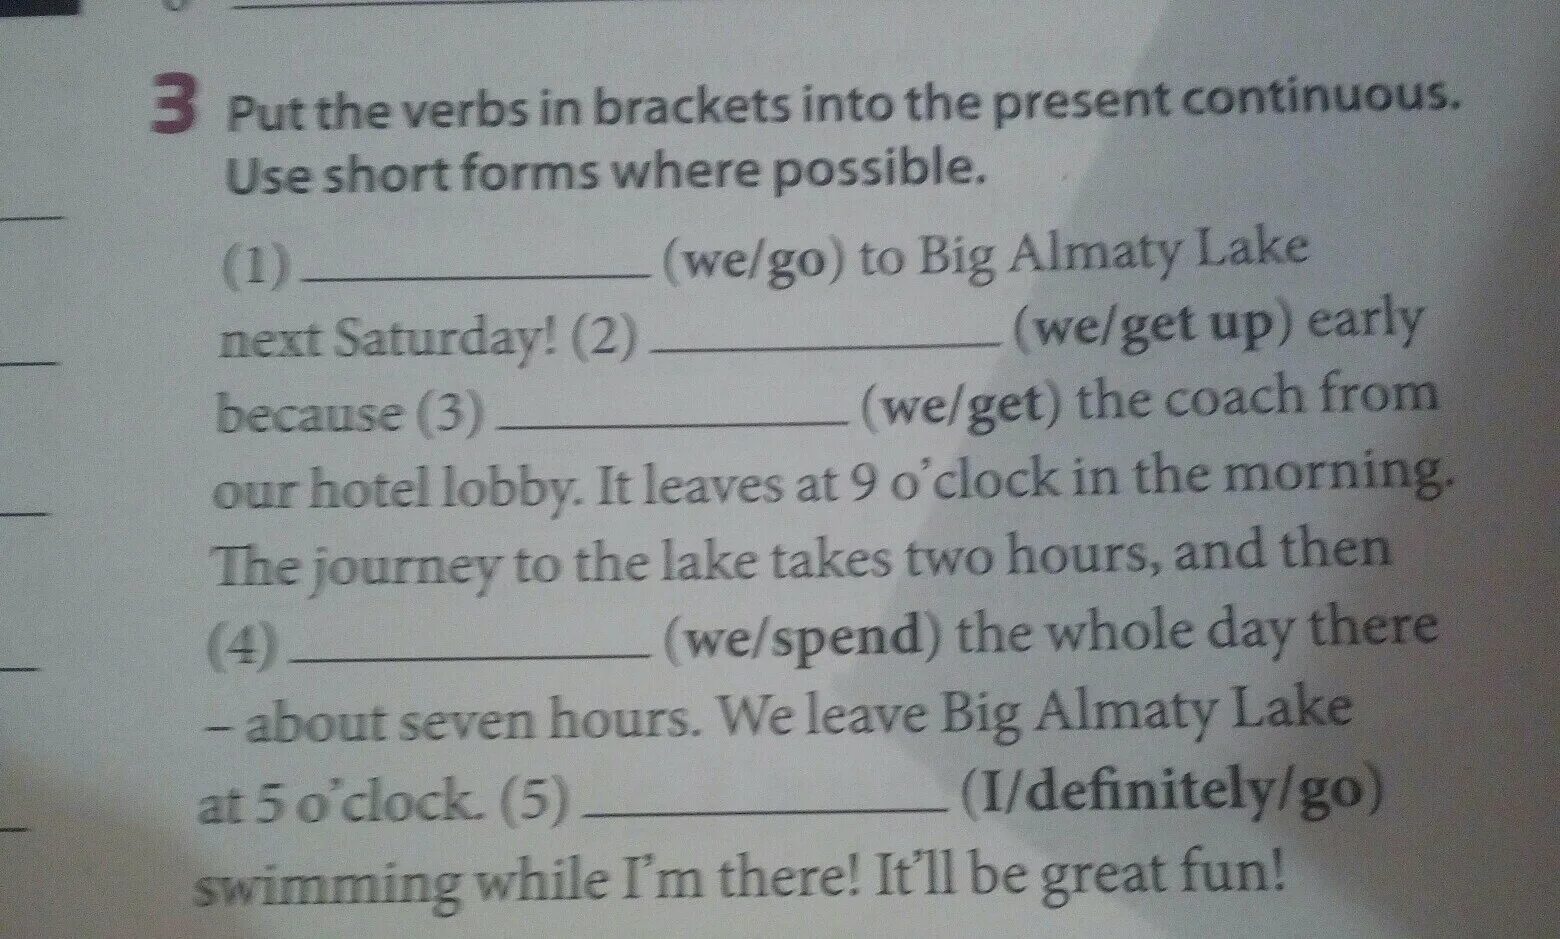 Open the brackets use present perfect continuous. Put the verbs in Brackets into the present. Put the verbs in Brackets into the present Continuous. Put the verbs in the present Continuous. Put the verbs in Brackets in the present Continuous.